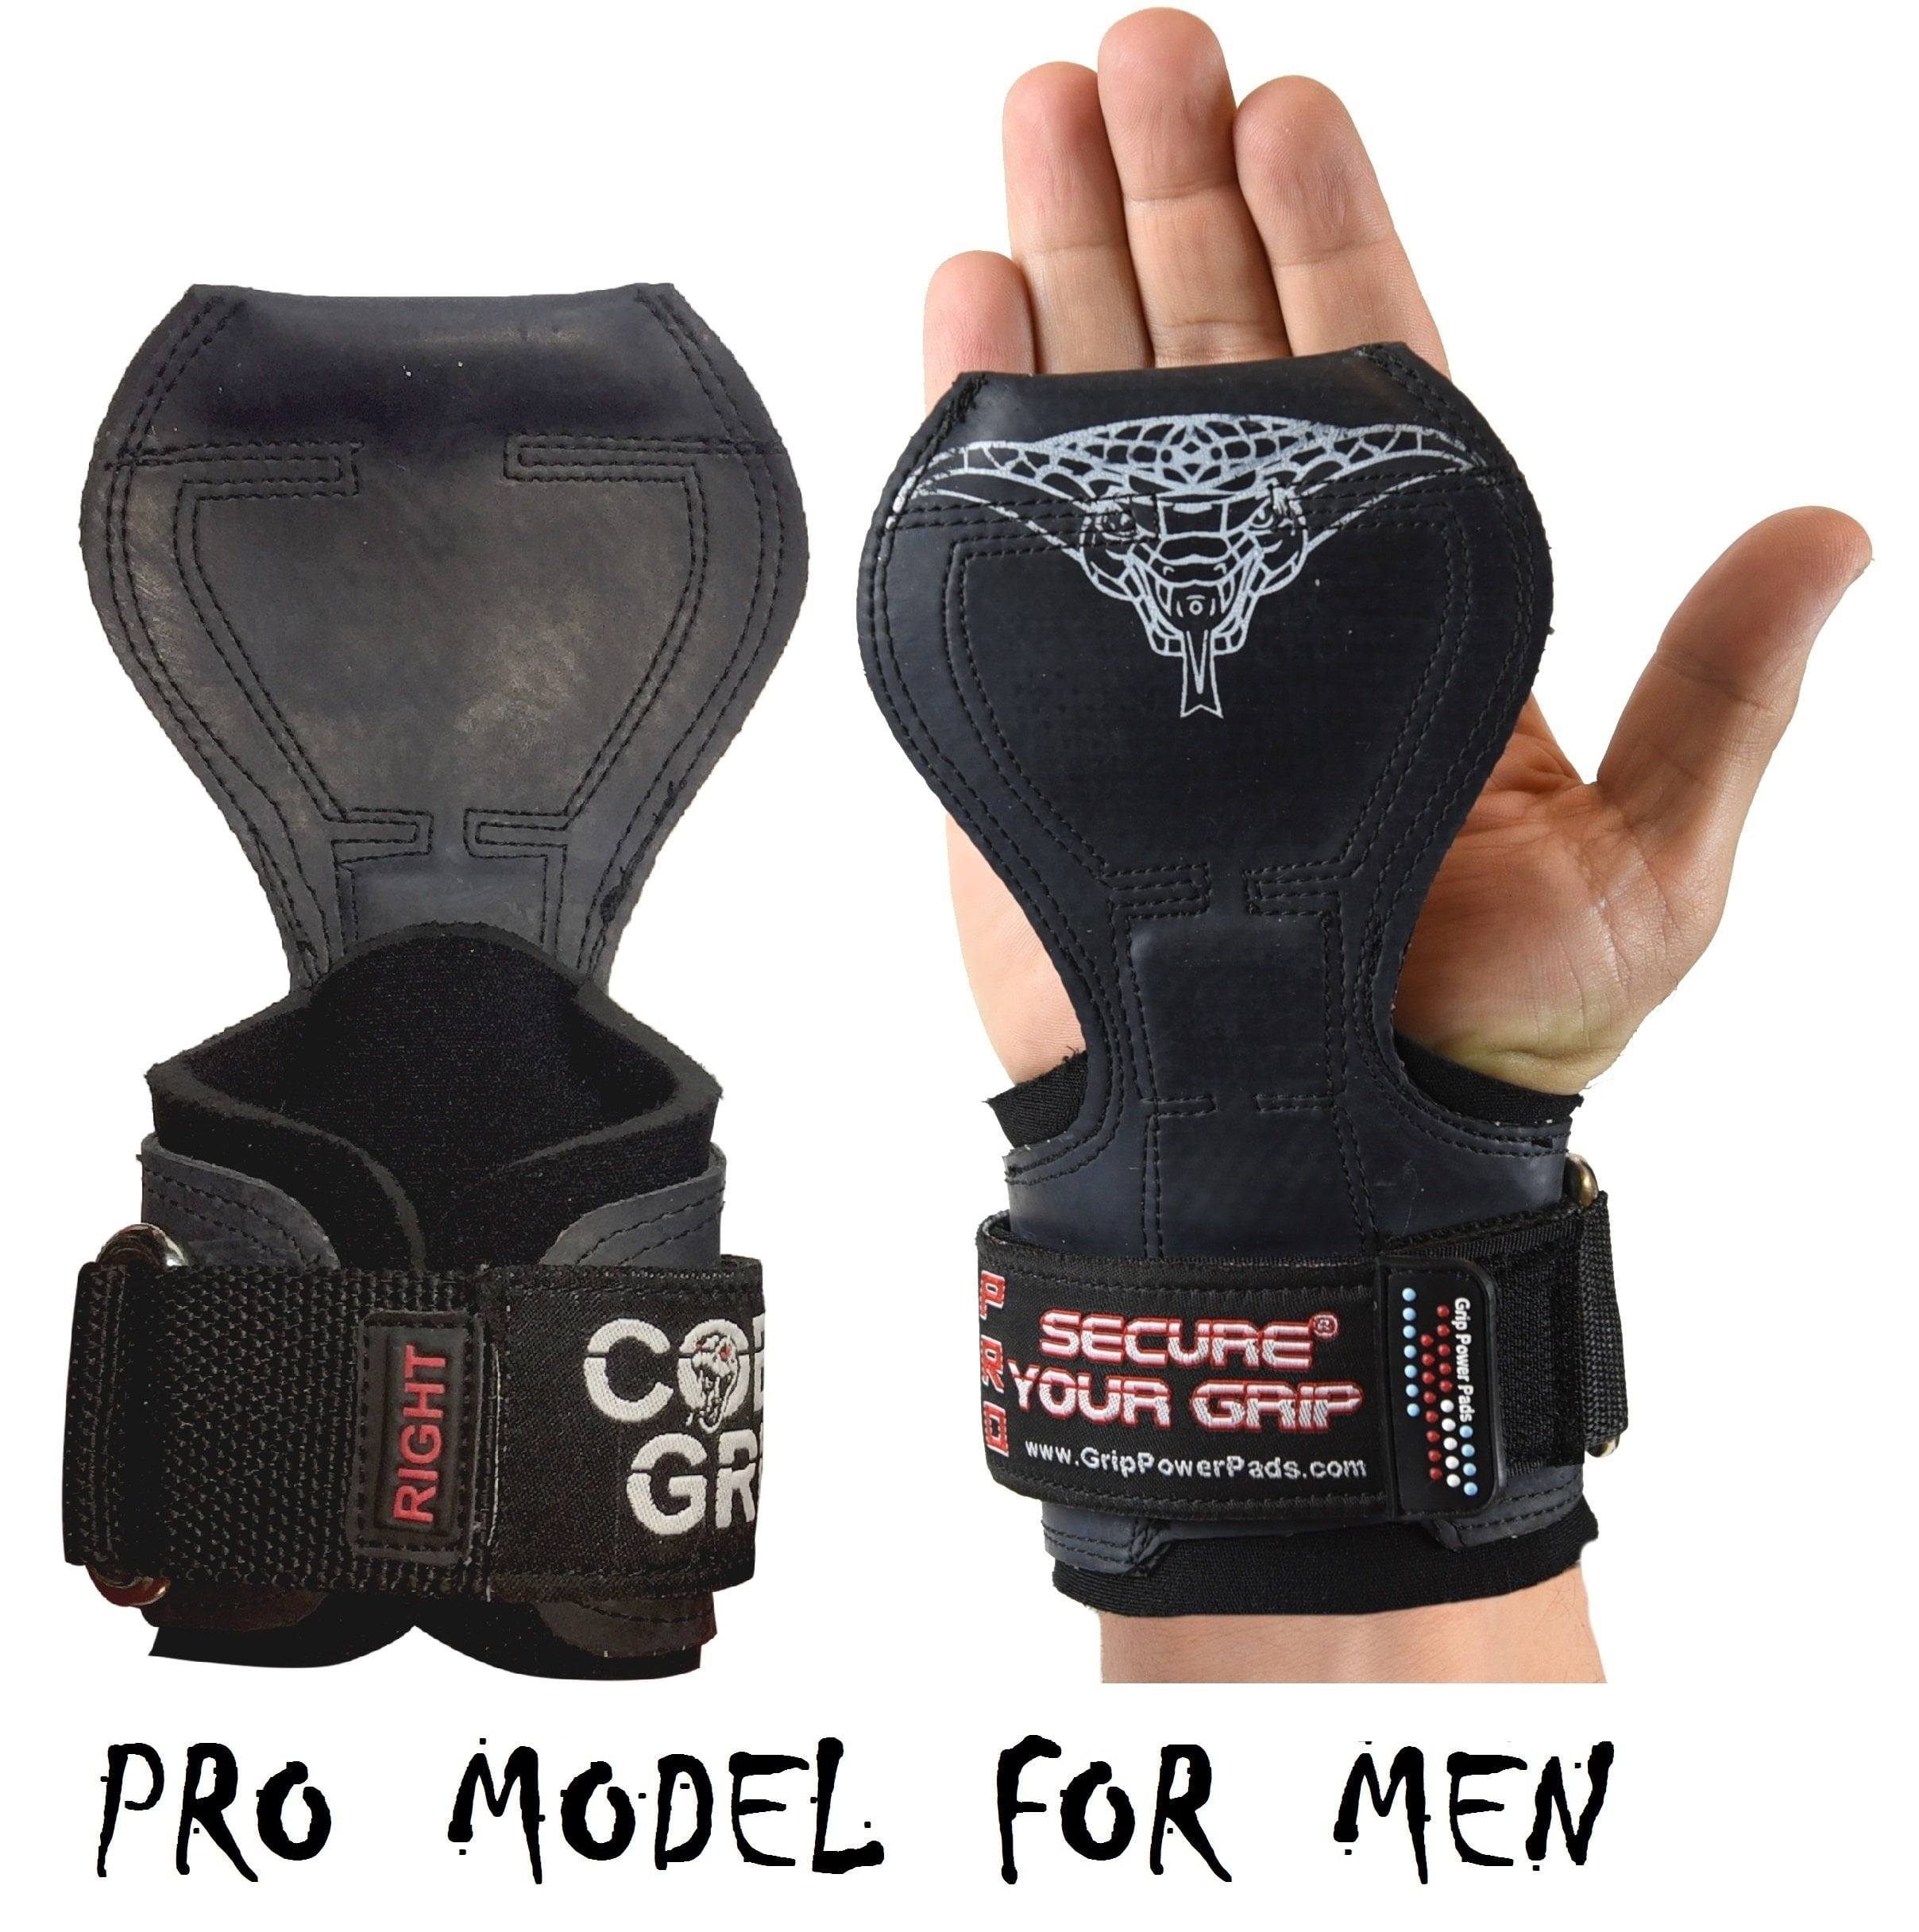 Kinetic RX Pro Weight Lifting Body Building Gloves Gym Training Wrap Grip Unisex 